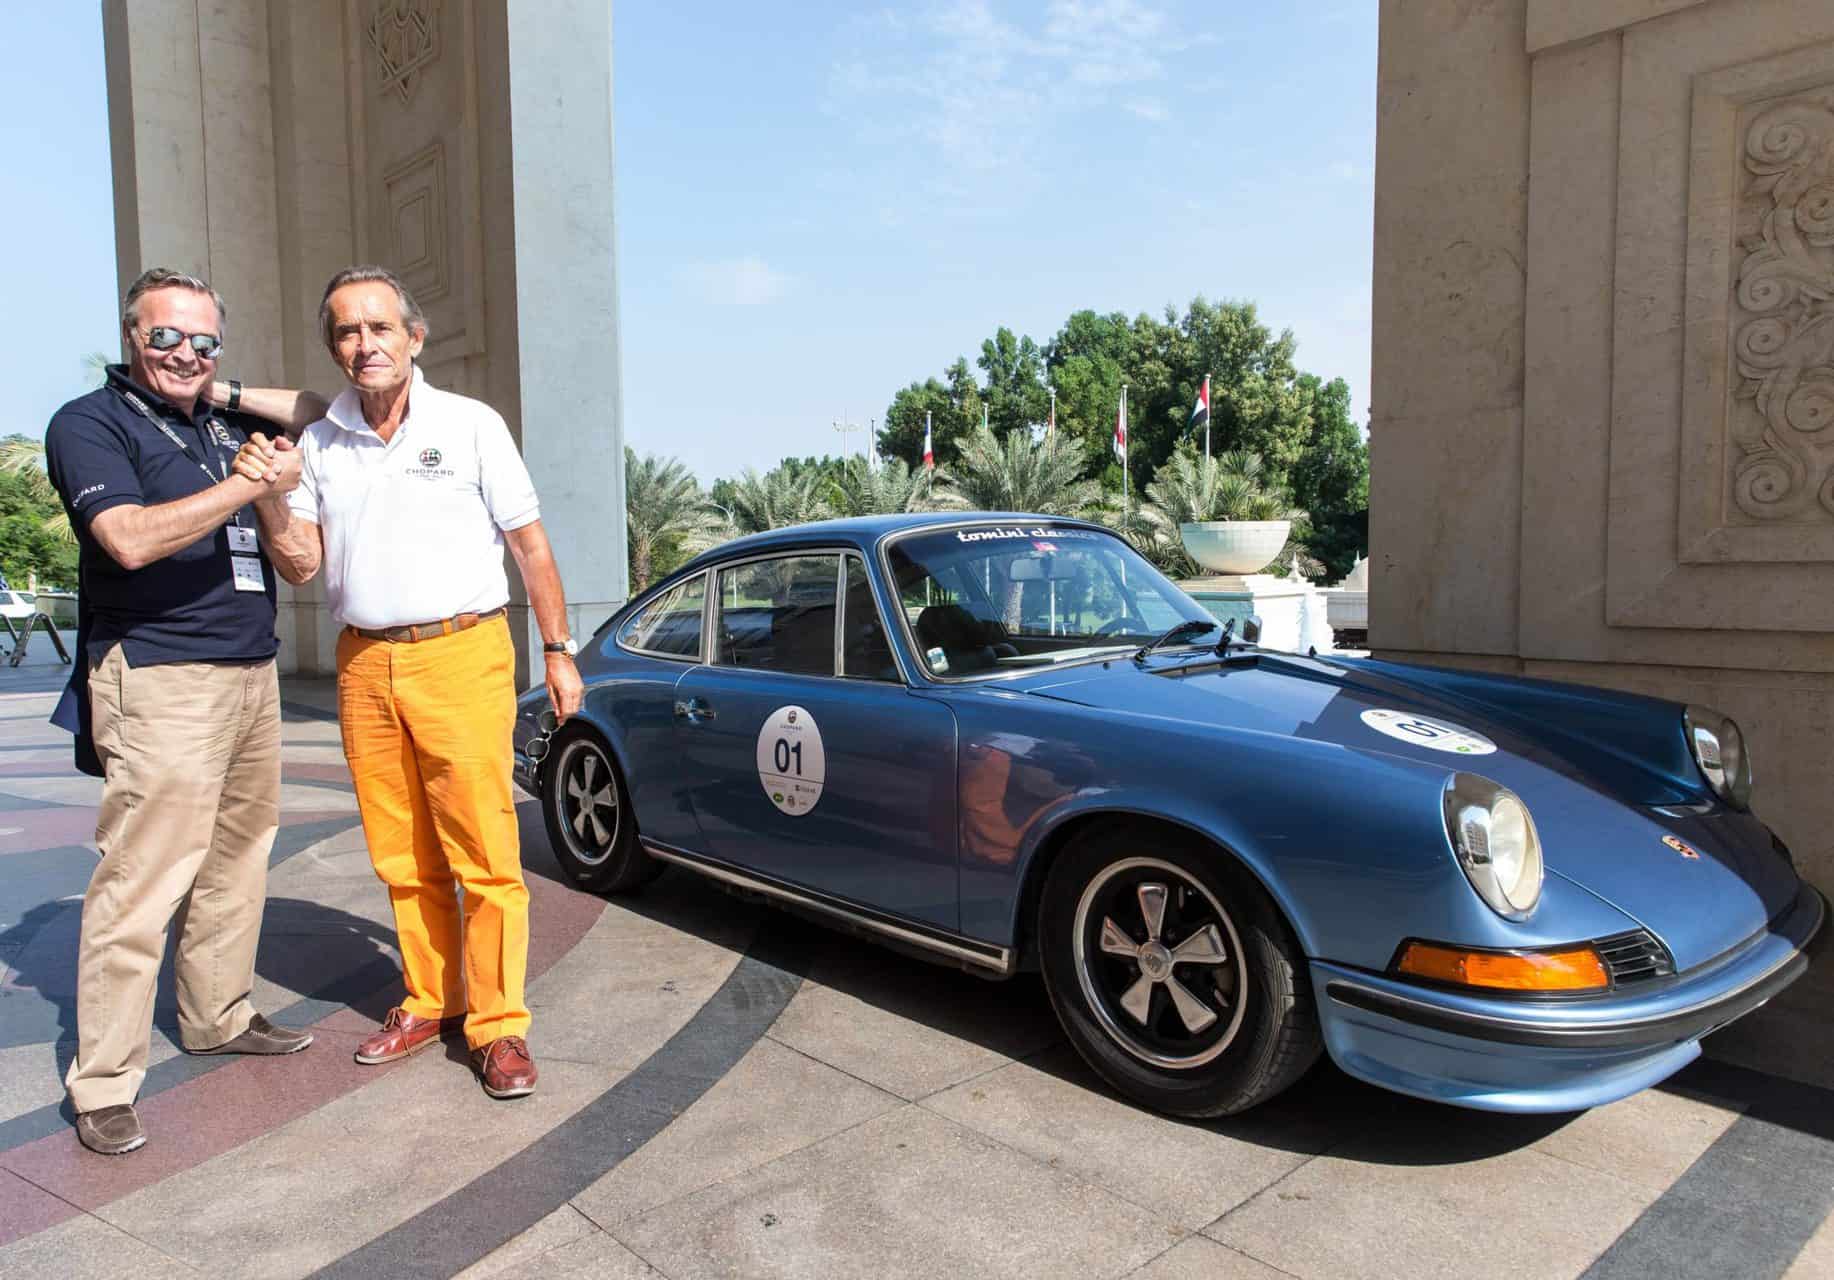 Chopard wraps up a successful first edition of the Chopard Classic Rally